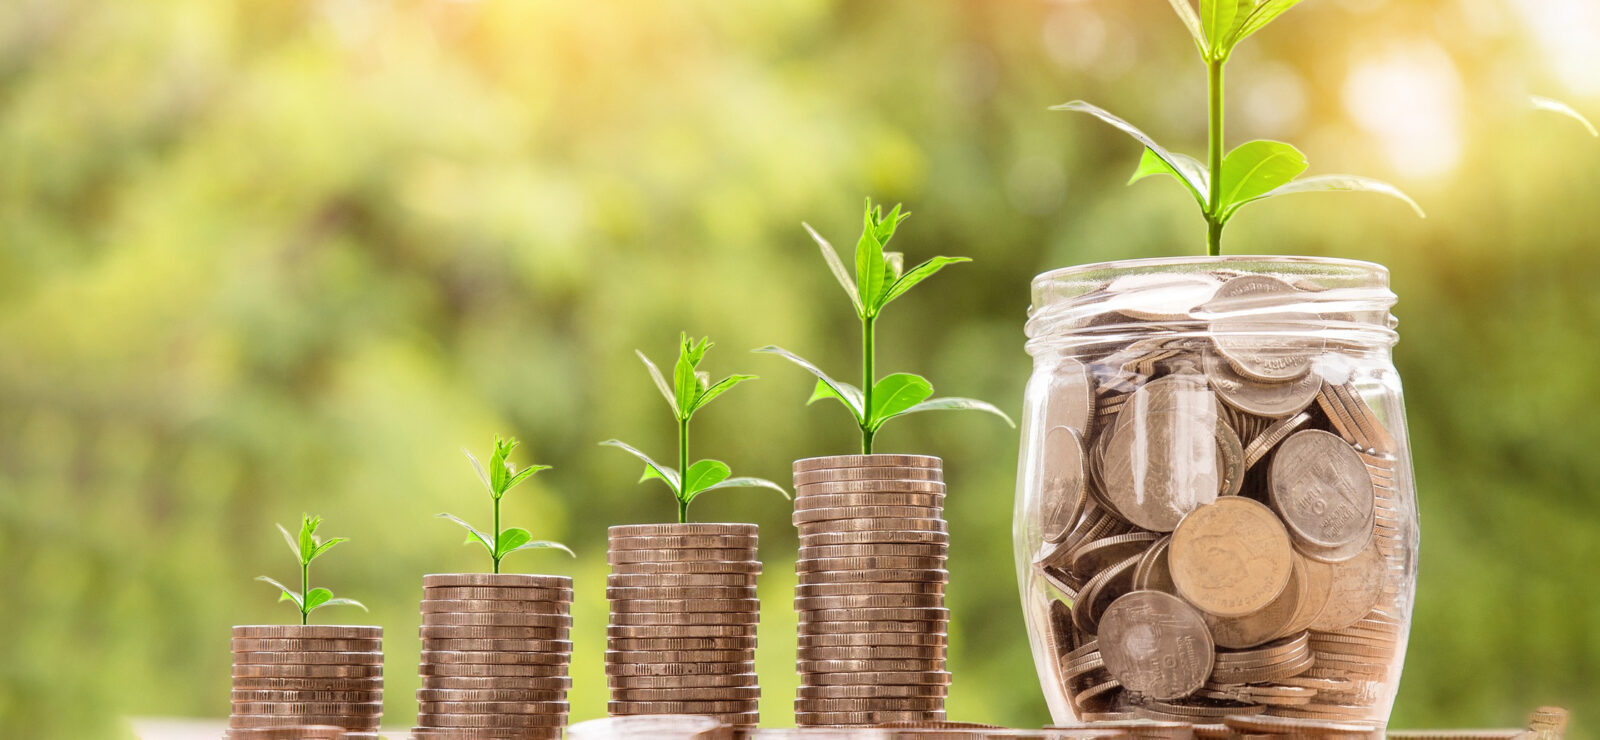 4 stacks of coins and then 1 glass pot of coins, representing the 5 tips in this blog. Each stack/ pile of coins has a small green stalk with leaves growing, signifying these tips will help you grow your public sector success.